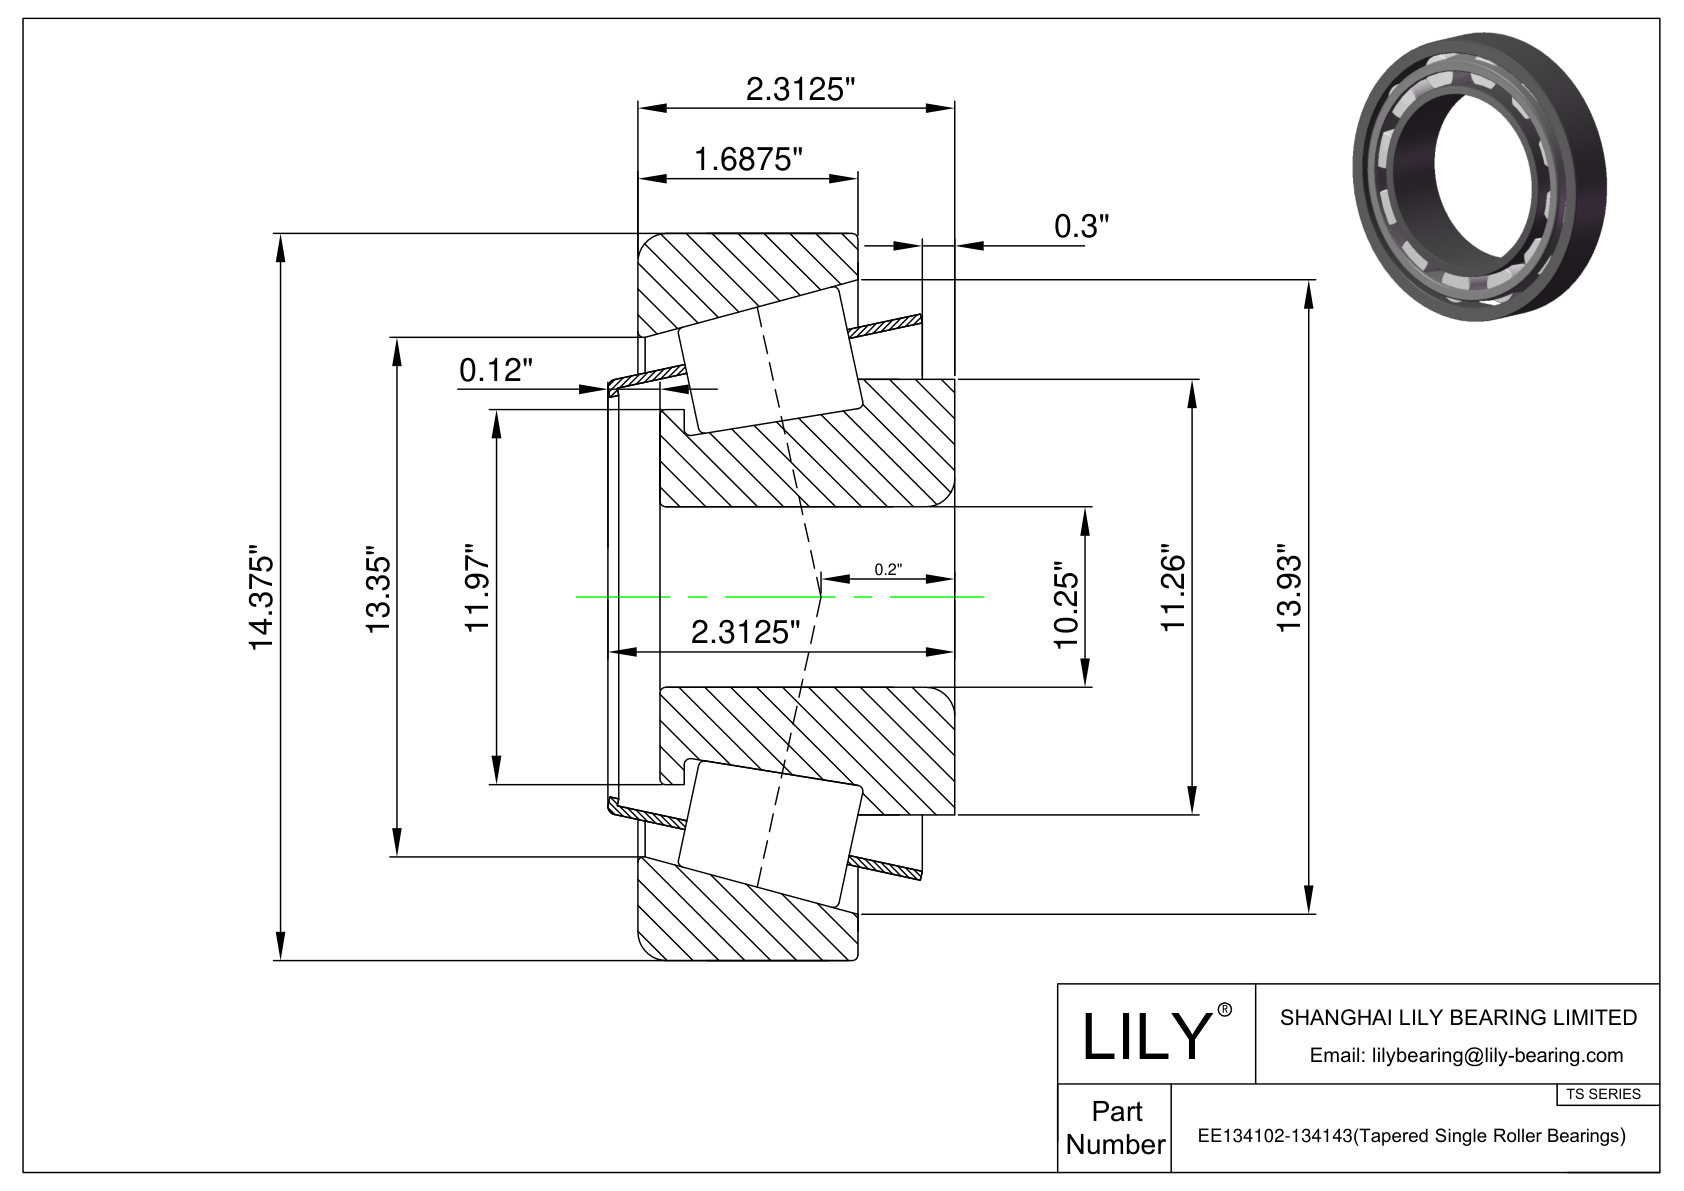 EE134102-134143 TS (Tapered Single Roller Bearings) (Imperial) cad drawing